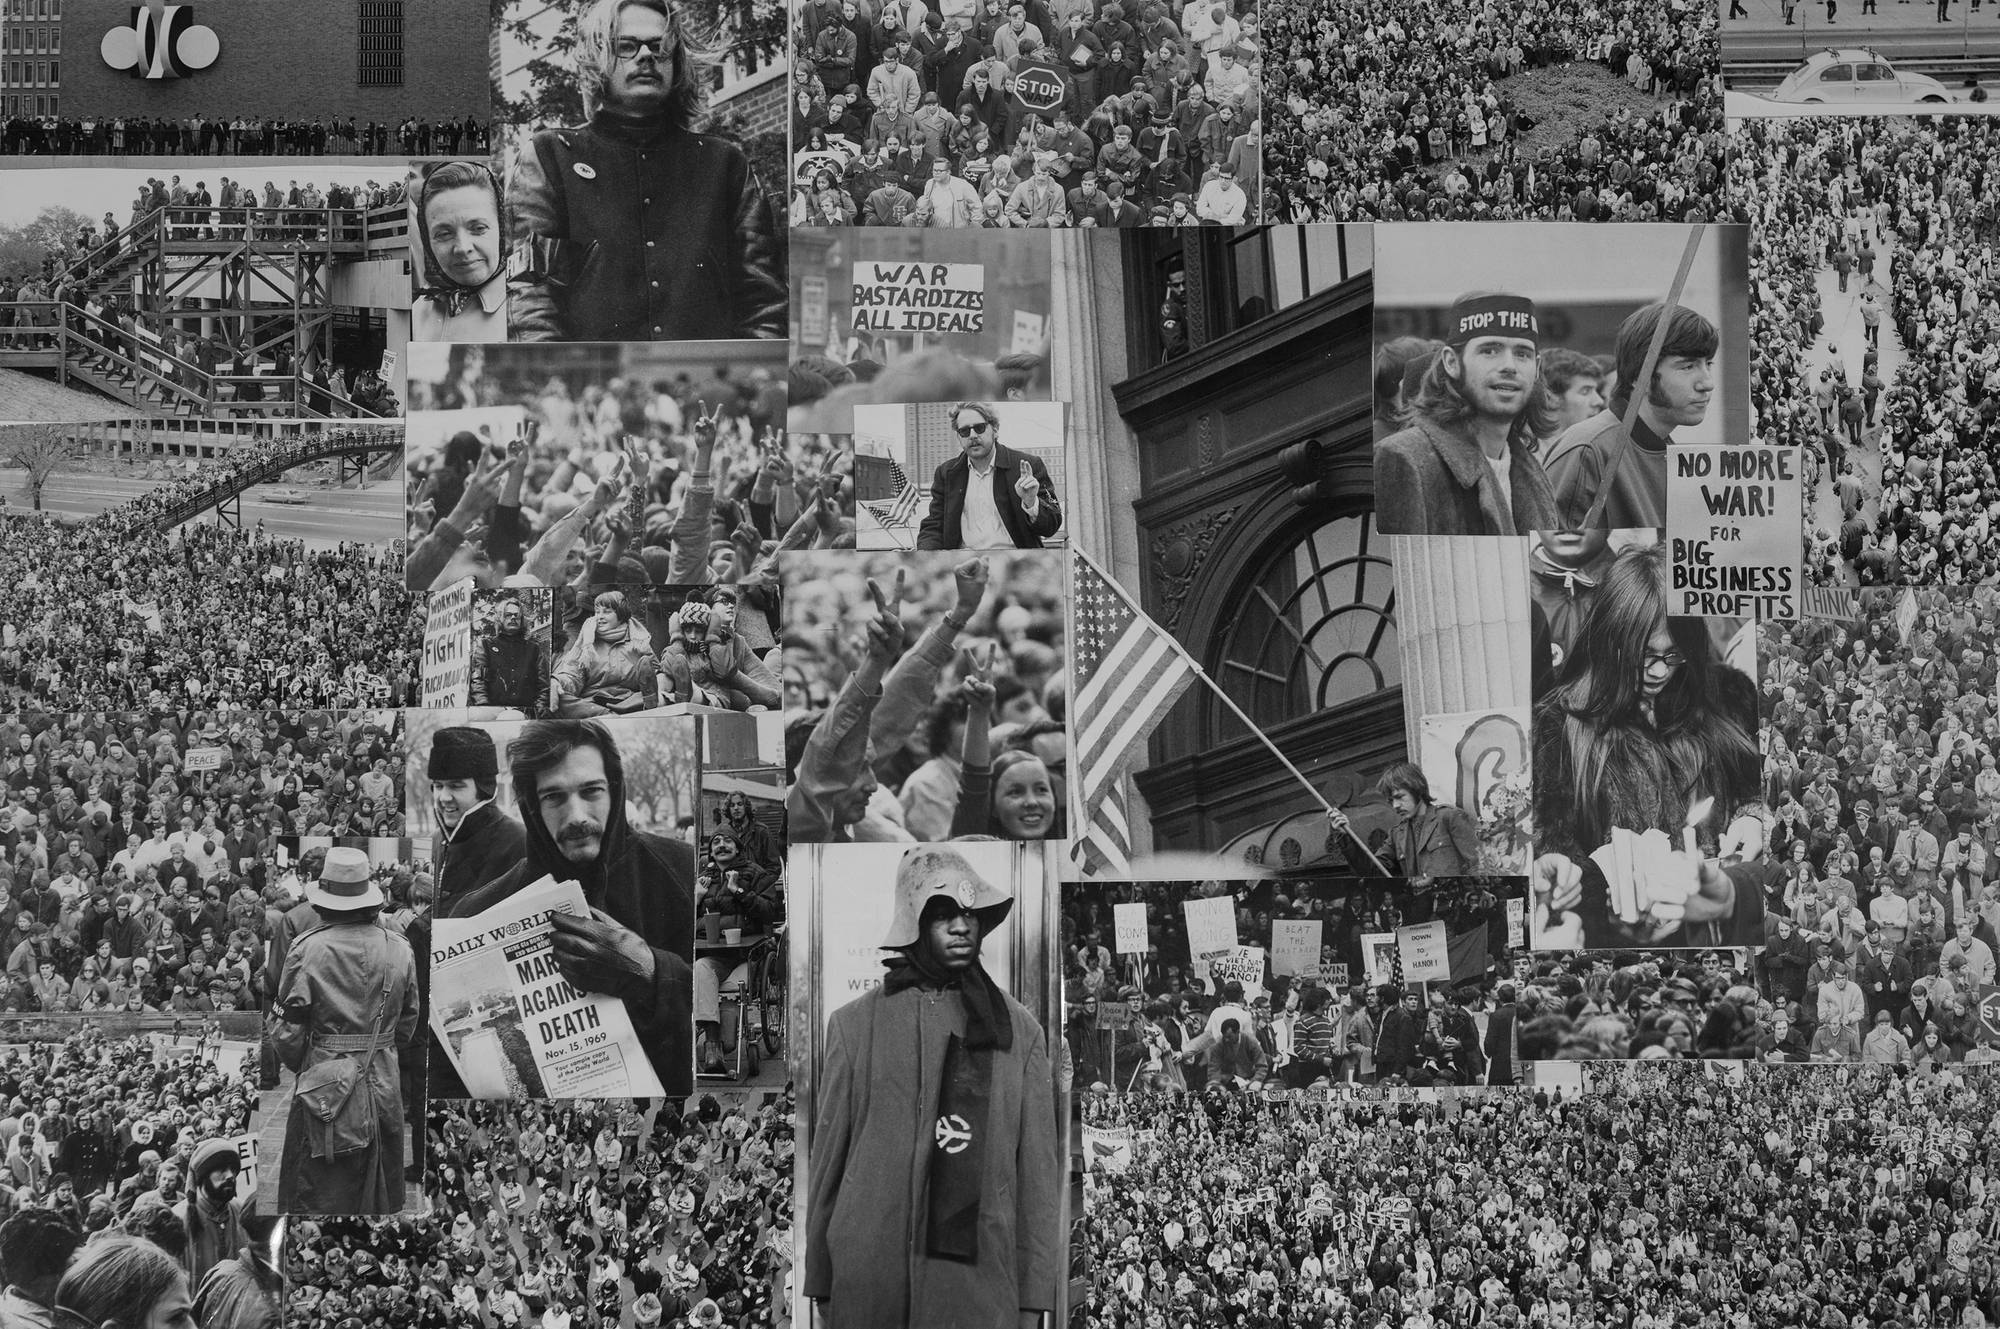 Black and white photo collage of student protests. Signs say "No more war for big business profits" and "War bastardizes all ideals."